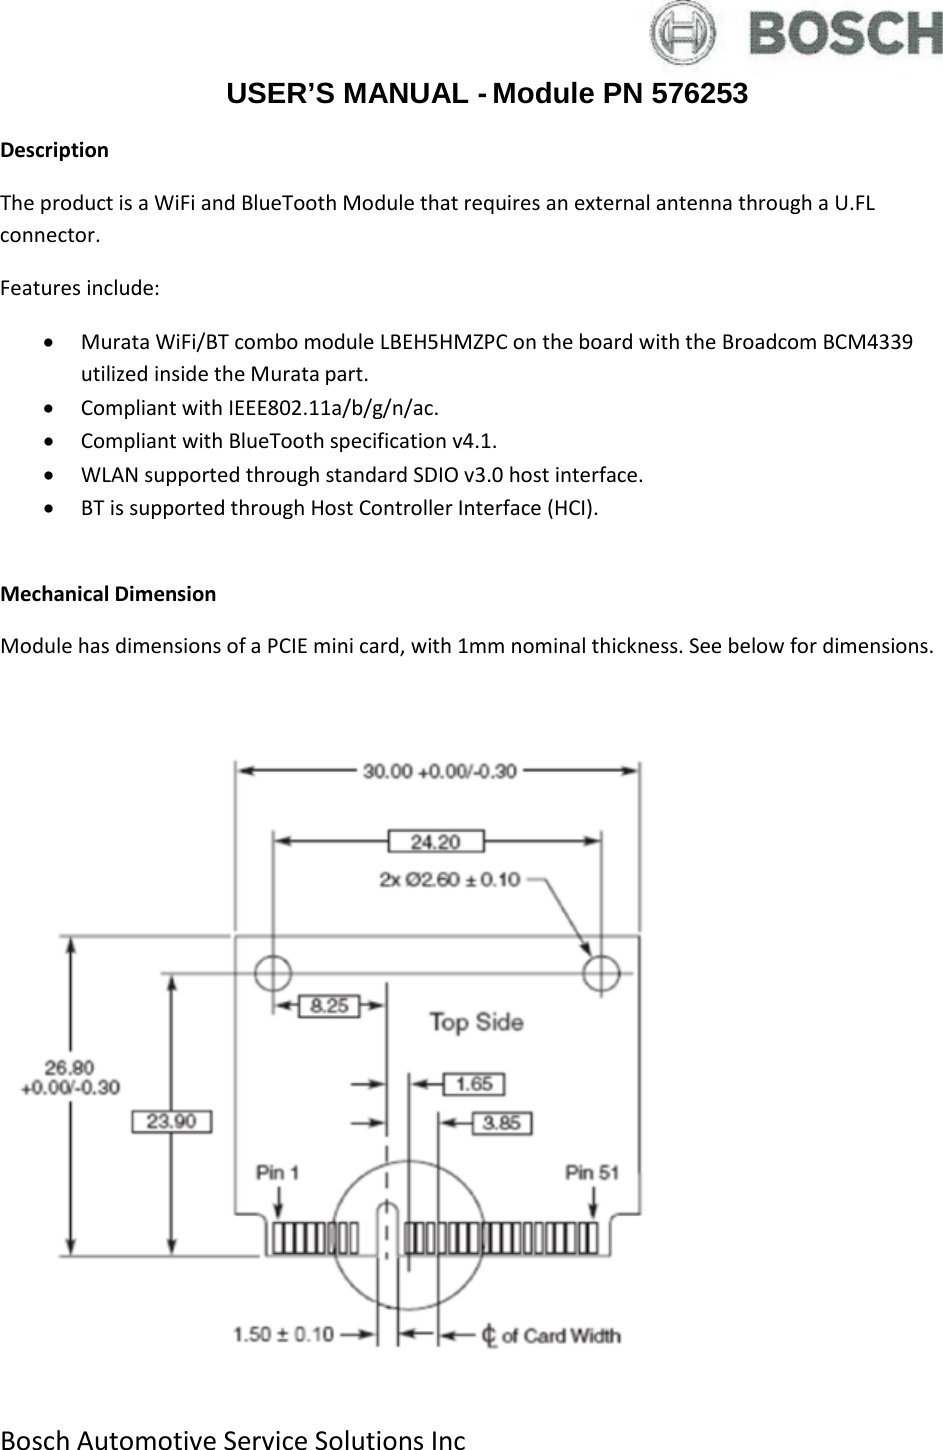  Bosch Automotive Service Solutions Inc  USER’S MANUAL - Module PN 576253 Description The product is a WiFi and BlueTooth Module that requires an external antenna through a U.FL connector. Features include: • Murata WiFi/BT combo module LBEH5HMZPC on the board with the Broadcom BCM4339 utilized inside the Murata part. • Compliant with IEEE802.11a/b/g/n/ac. • Compliant with BlueTooth specification v4.1. • WLAN supported through standard SDIO v3.0 host interface. • BT is supported through Host Controller Interface (HCI).  Mechanical Dimension Module has dimensions of a PCIE mini card, with 1mm nominal thickness. See below for dimensions.     